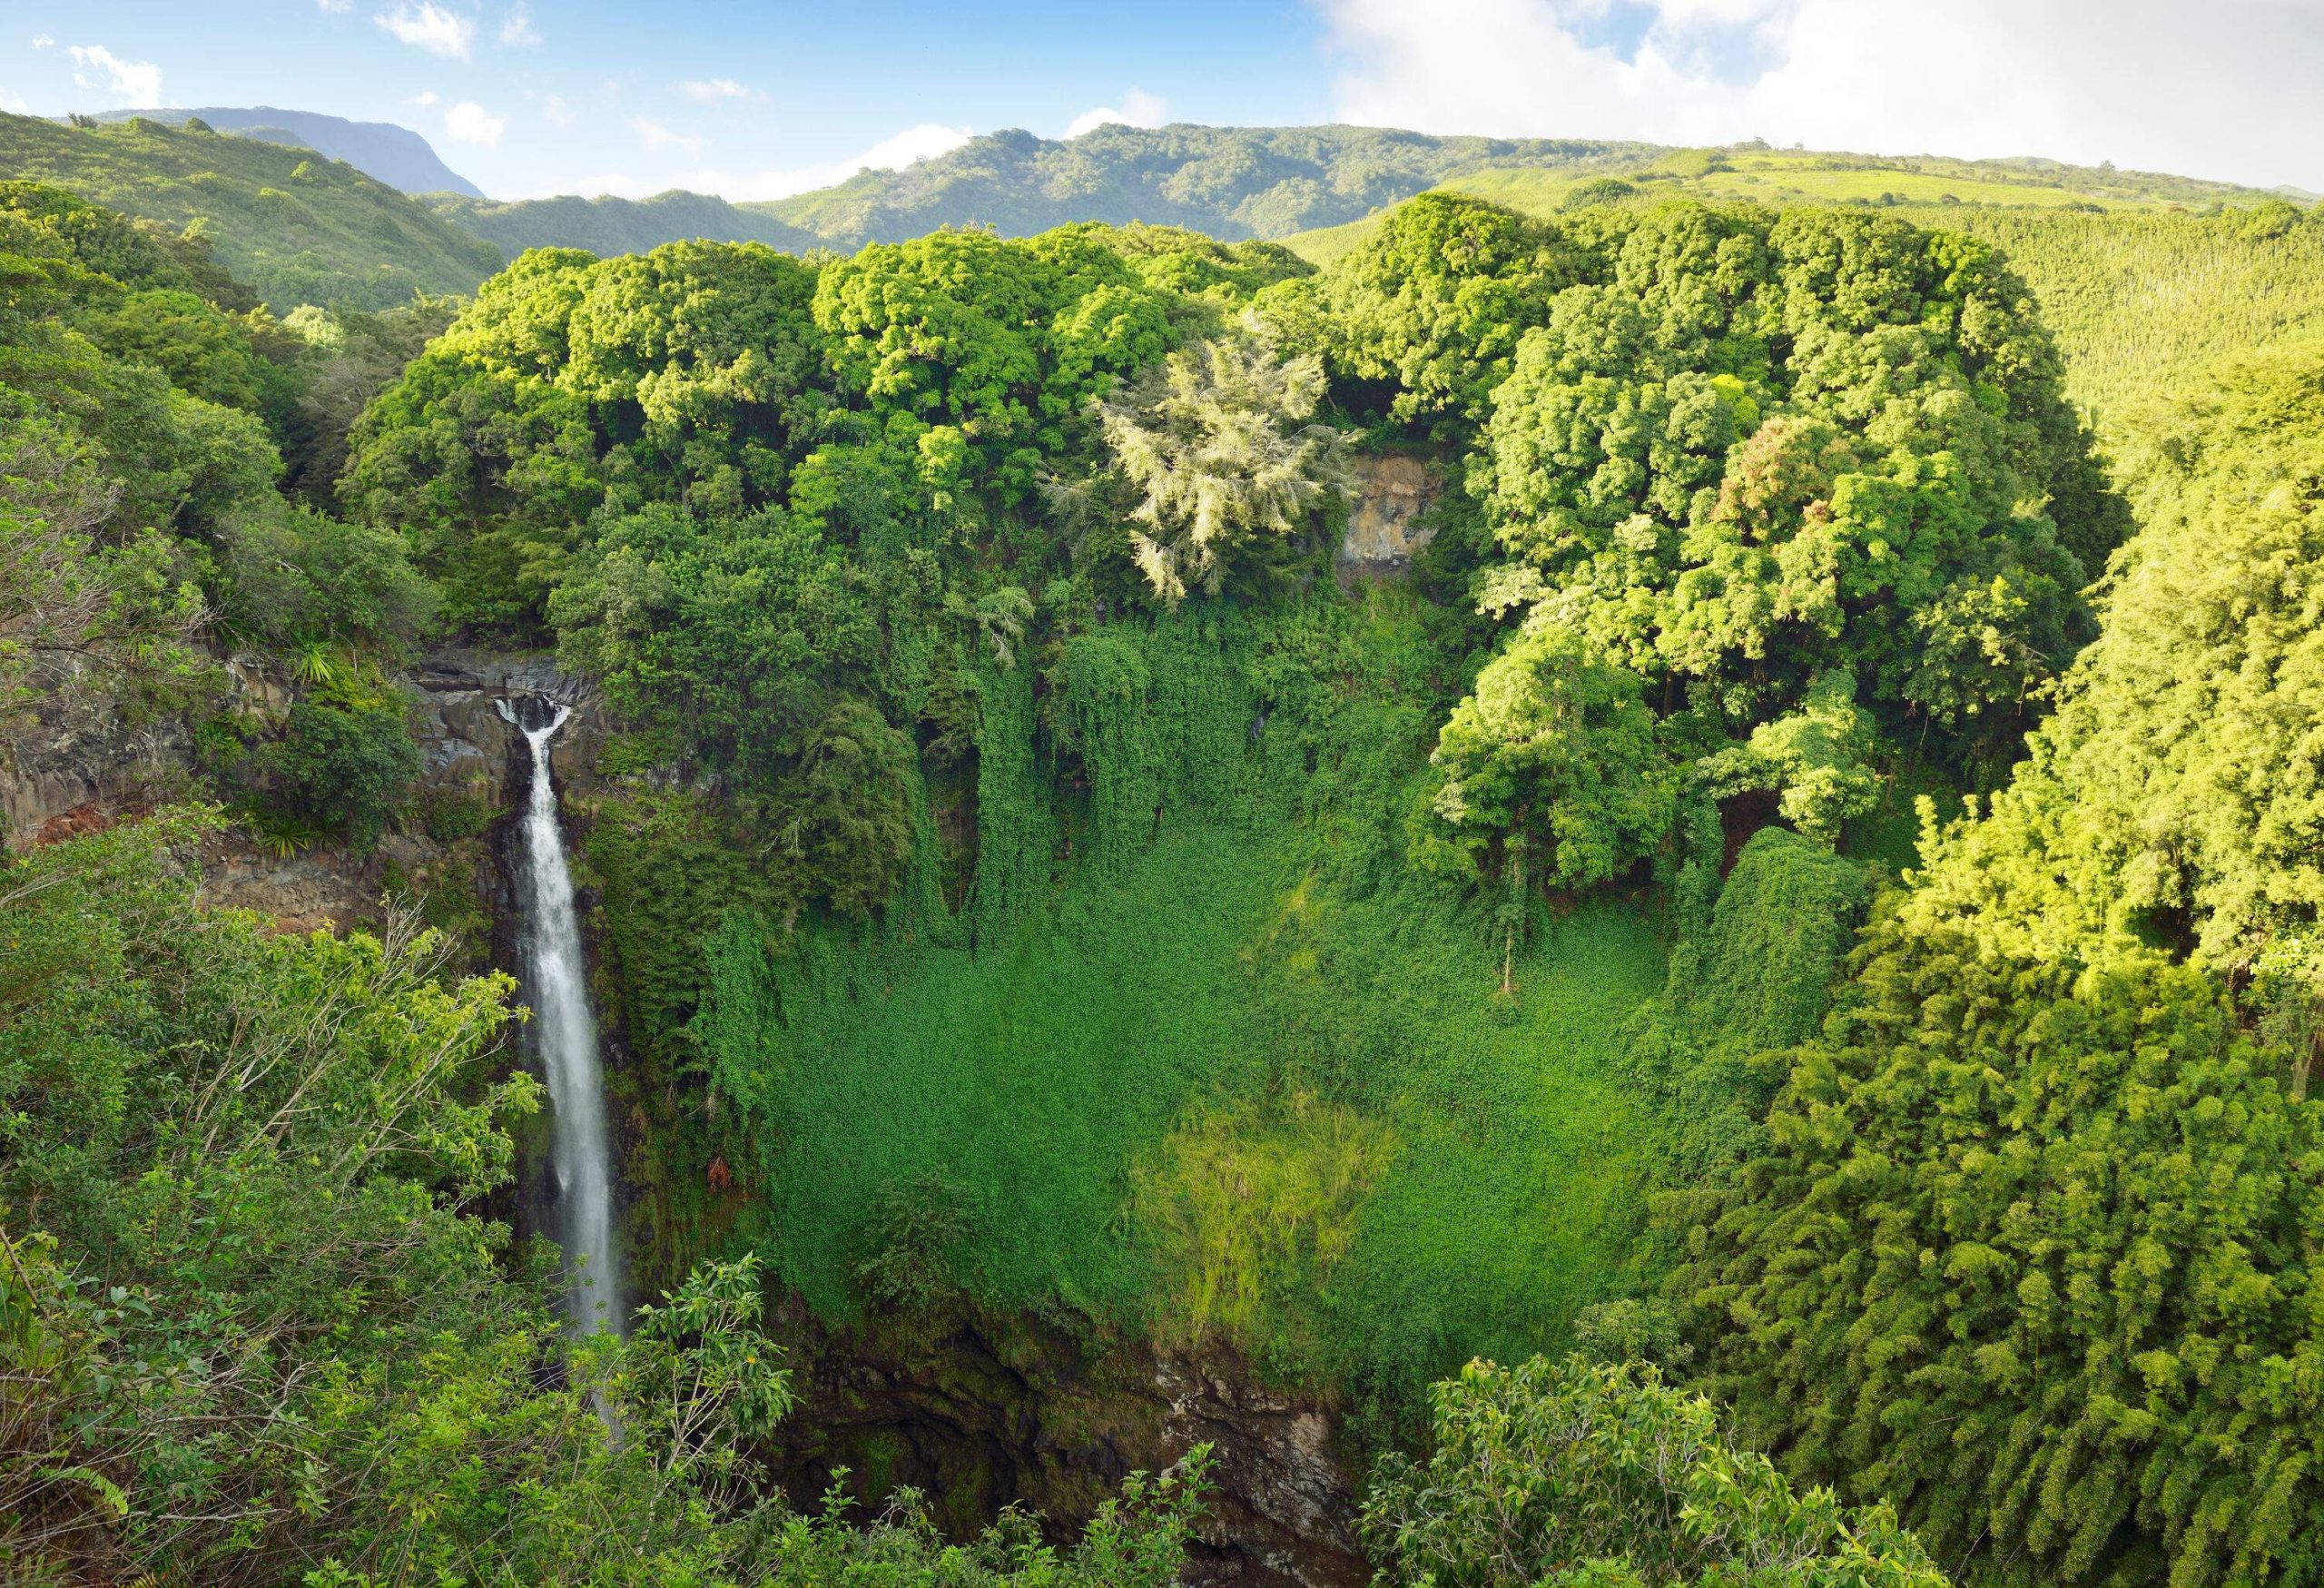 A captivating waterfall nestled amidst a verdant landscape that gracefully descends from towering cliffs, creating a picturesque scene of natural wonder.